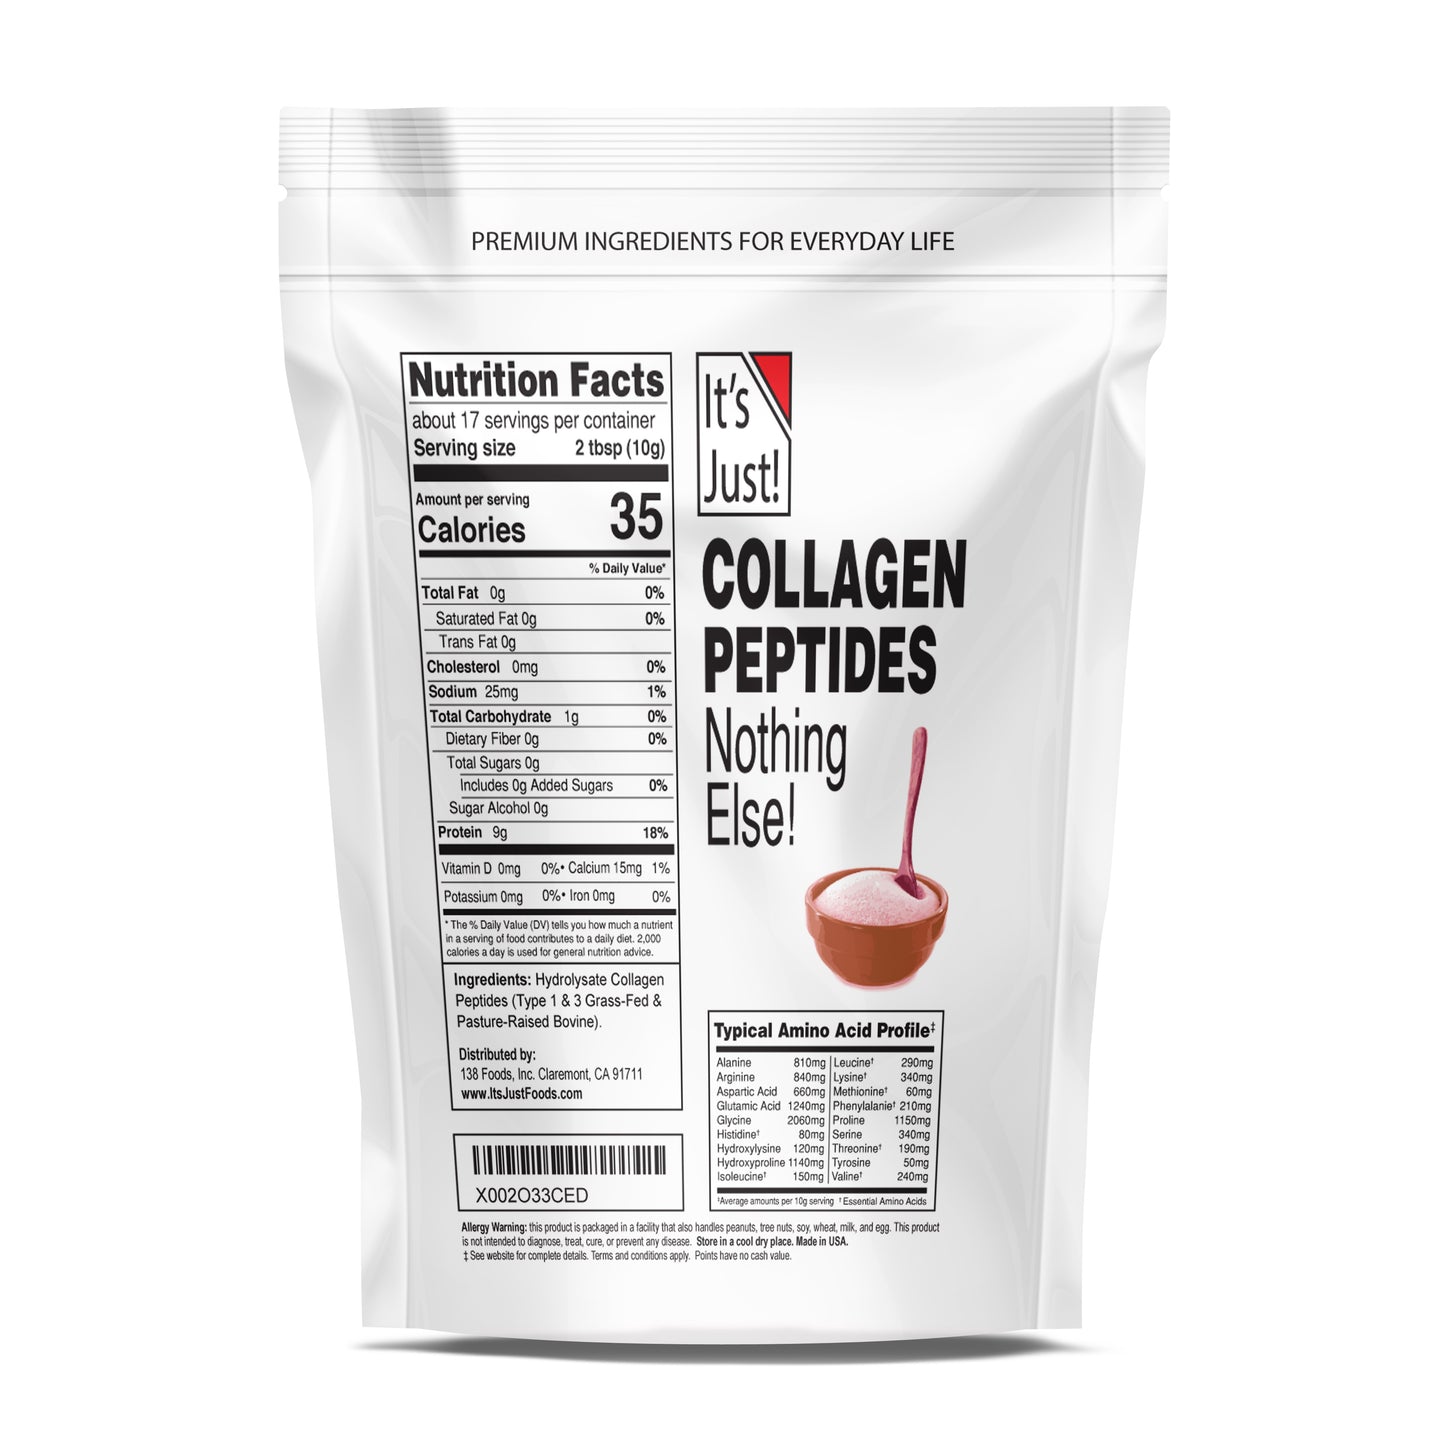 It's Just! - Collagen Peptides